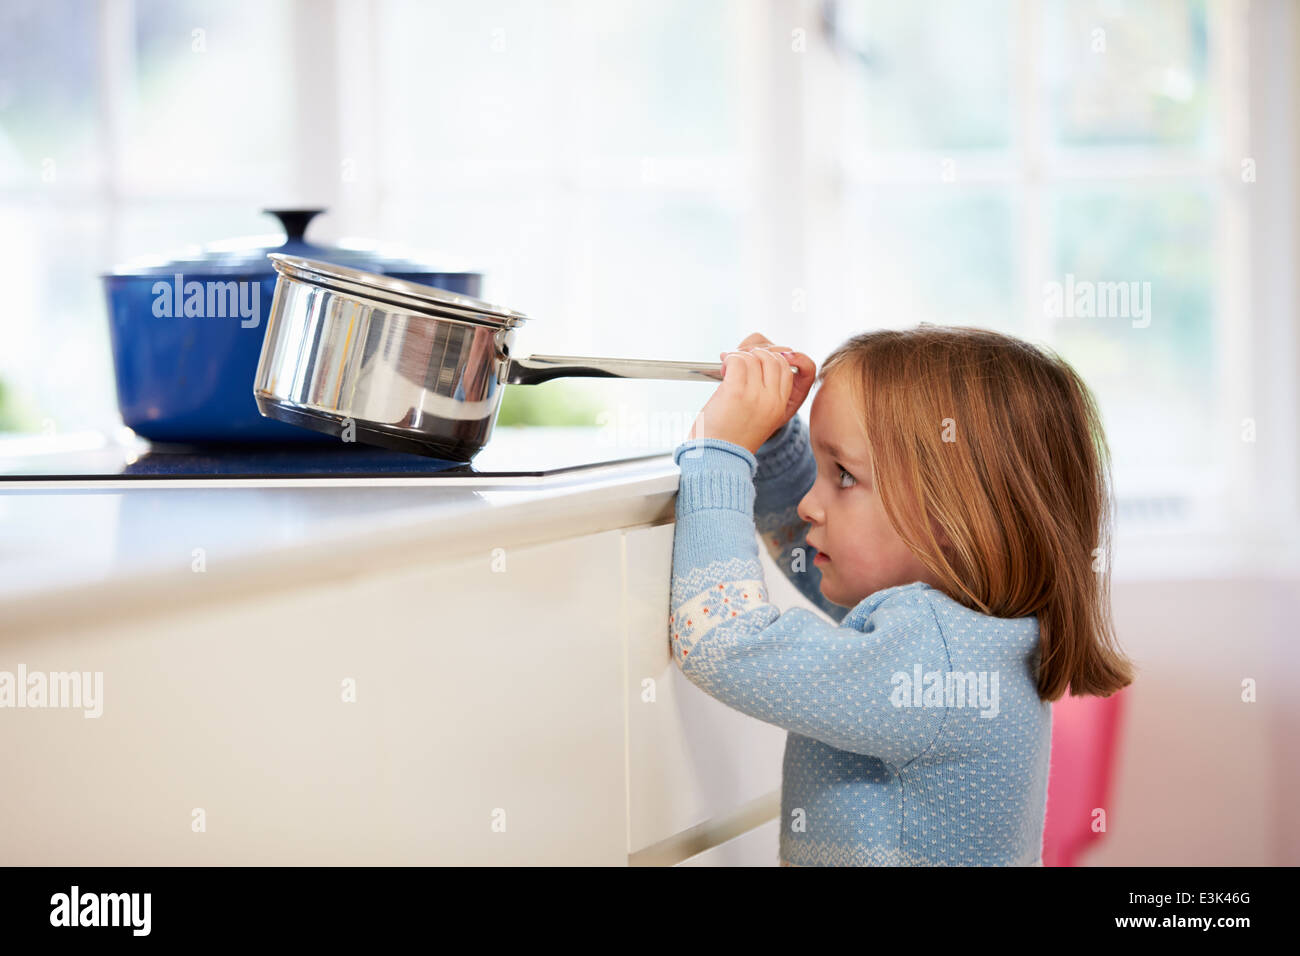 Young Girl Risking Accident With Pan In Kitchen Stock Photo